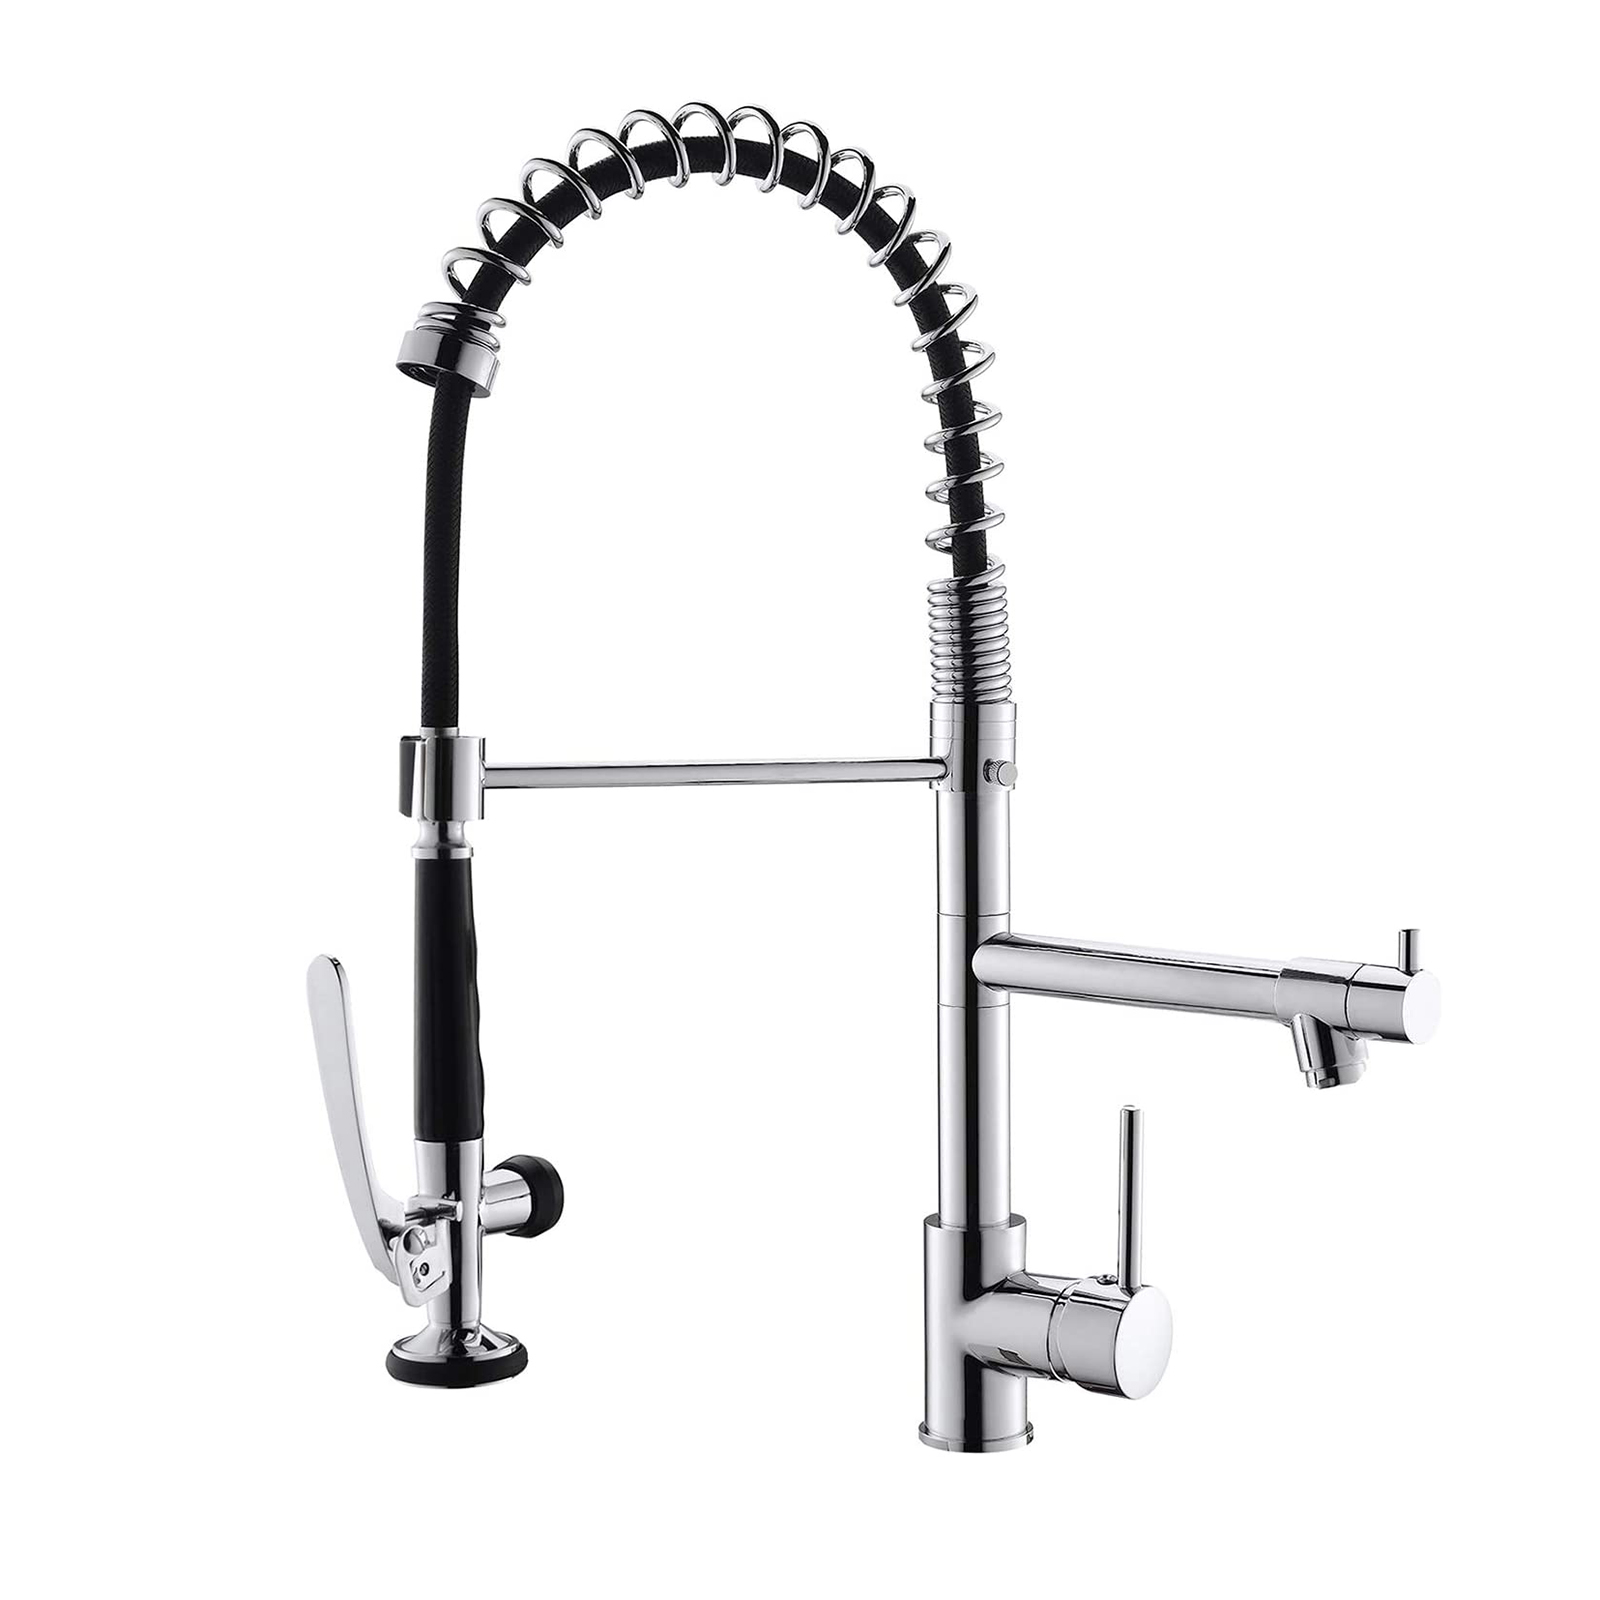 FLG Chrome Kitchen Faucet with Sprayer,Commercial Single Handle Pull Down Kitchen Sink Faucet